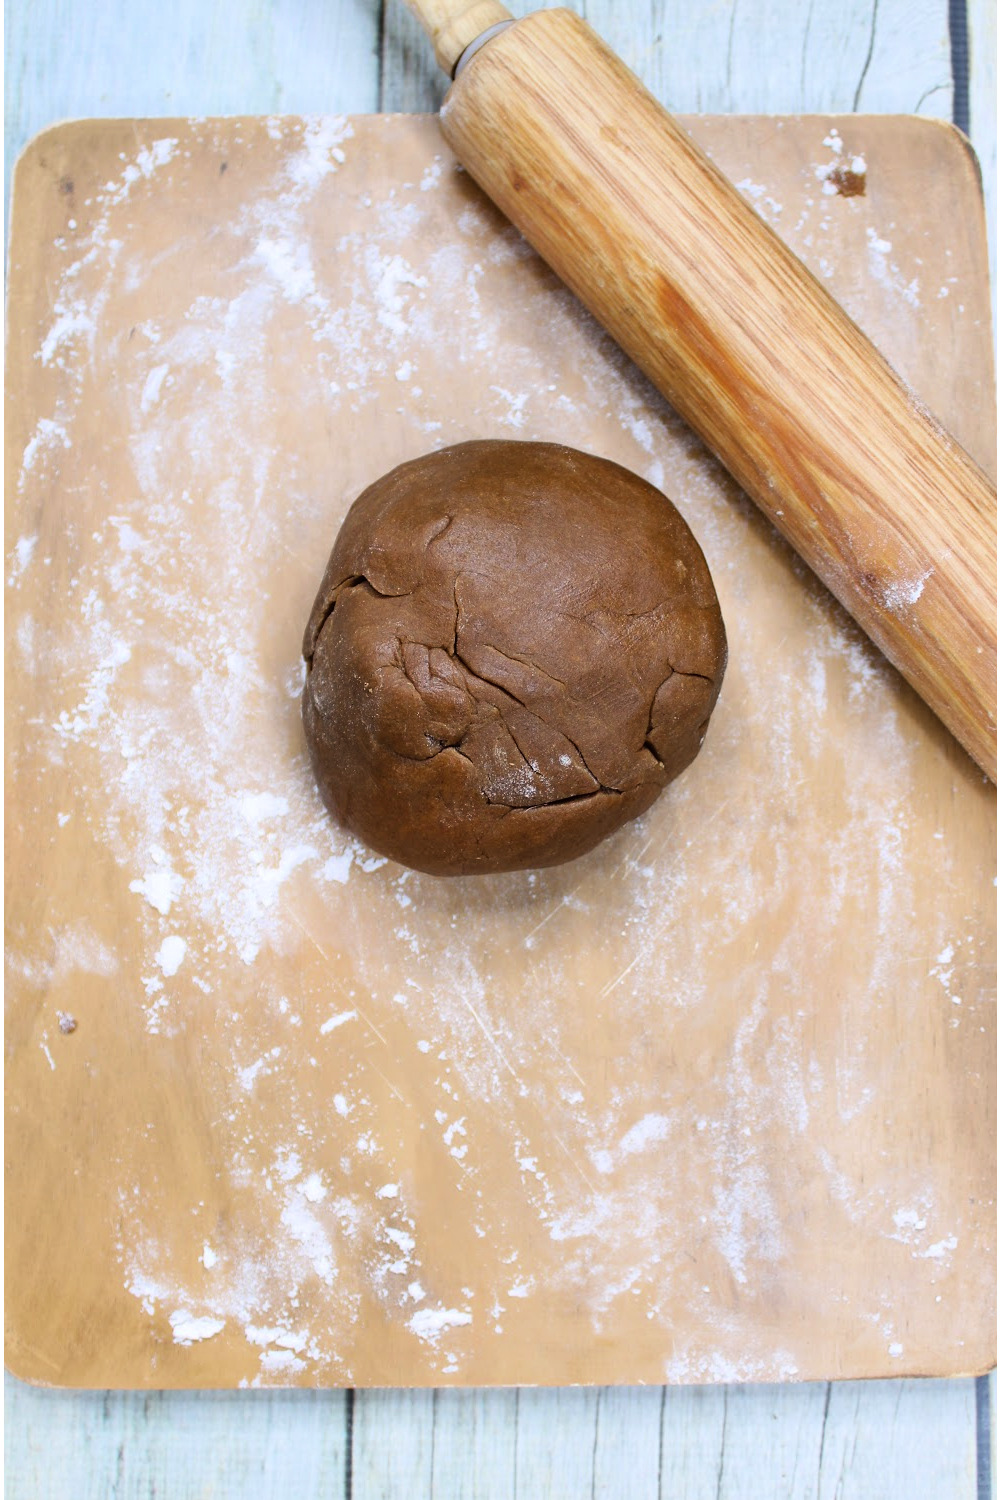 Place the dough ball on a lightly floured counter. Roll out the gingerbread dough to 1⁄2 inch thick.